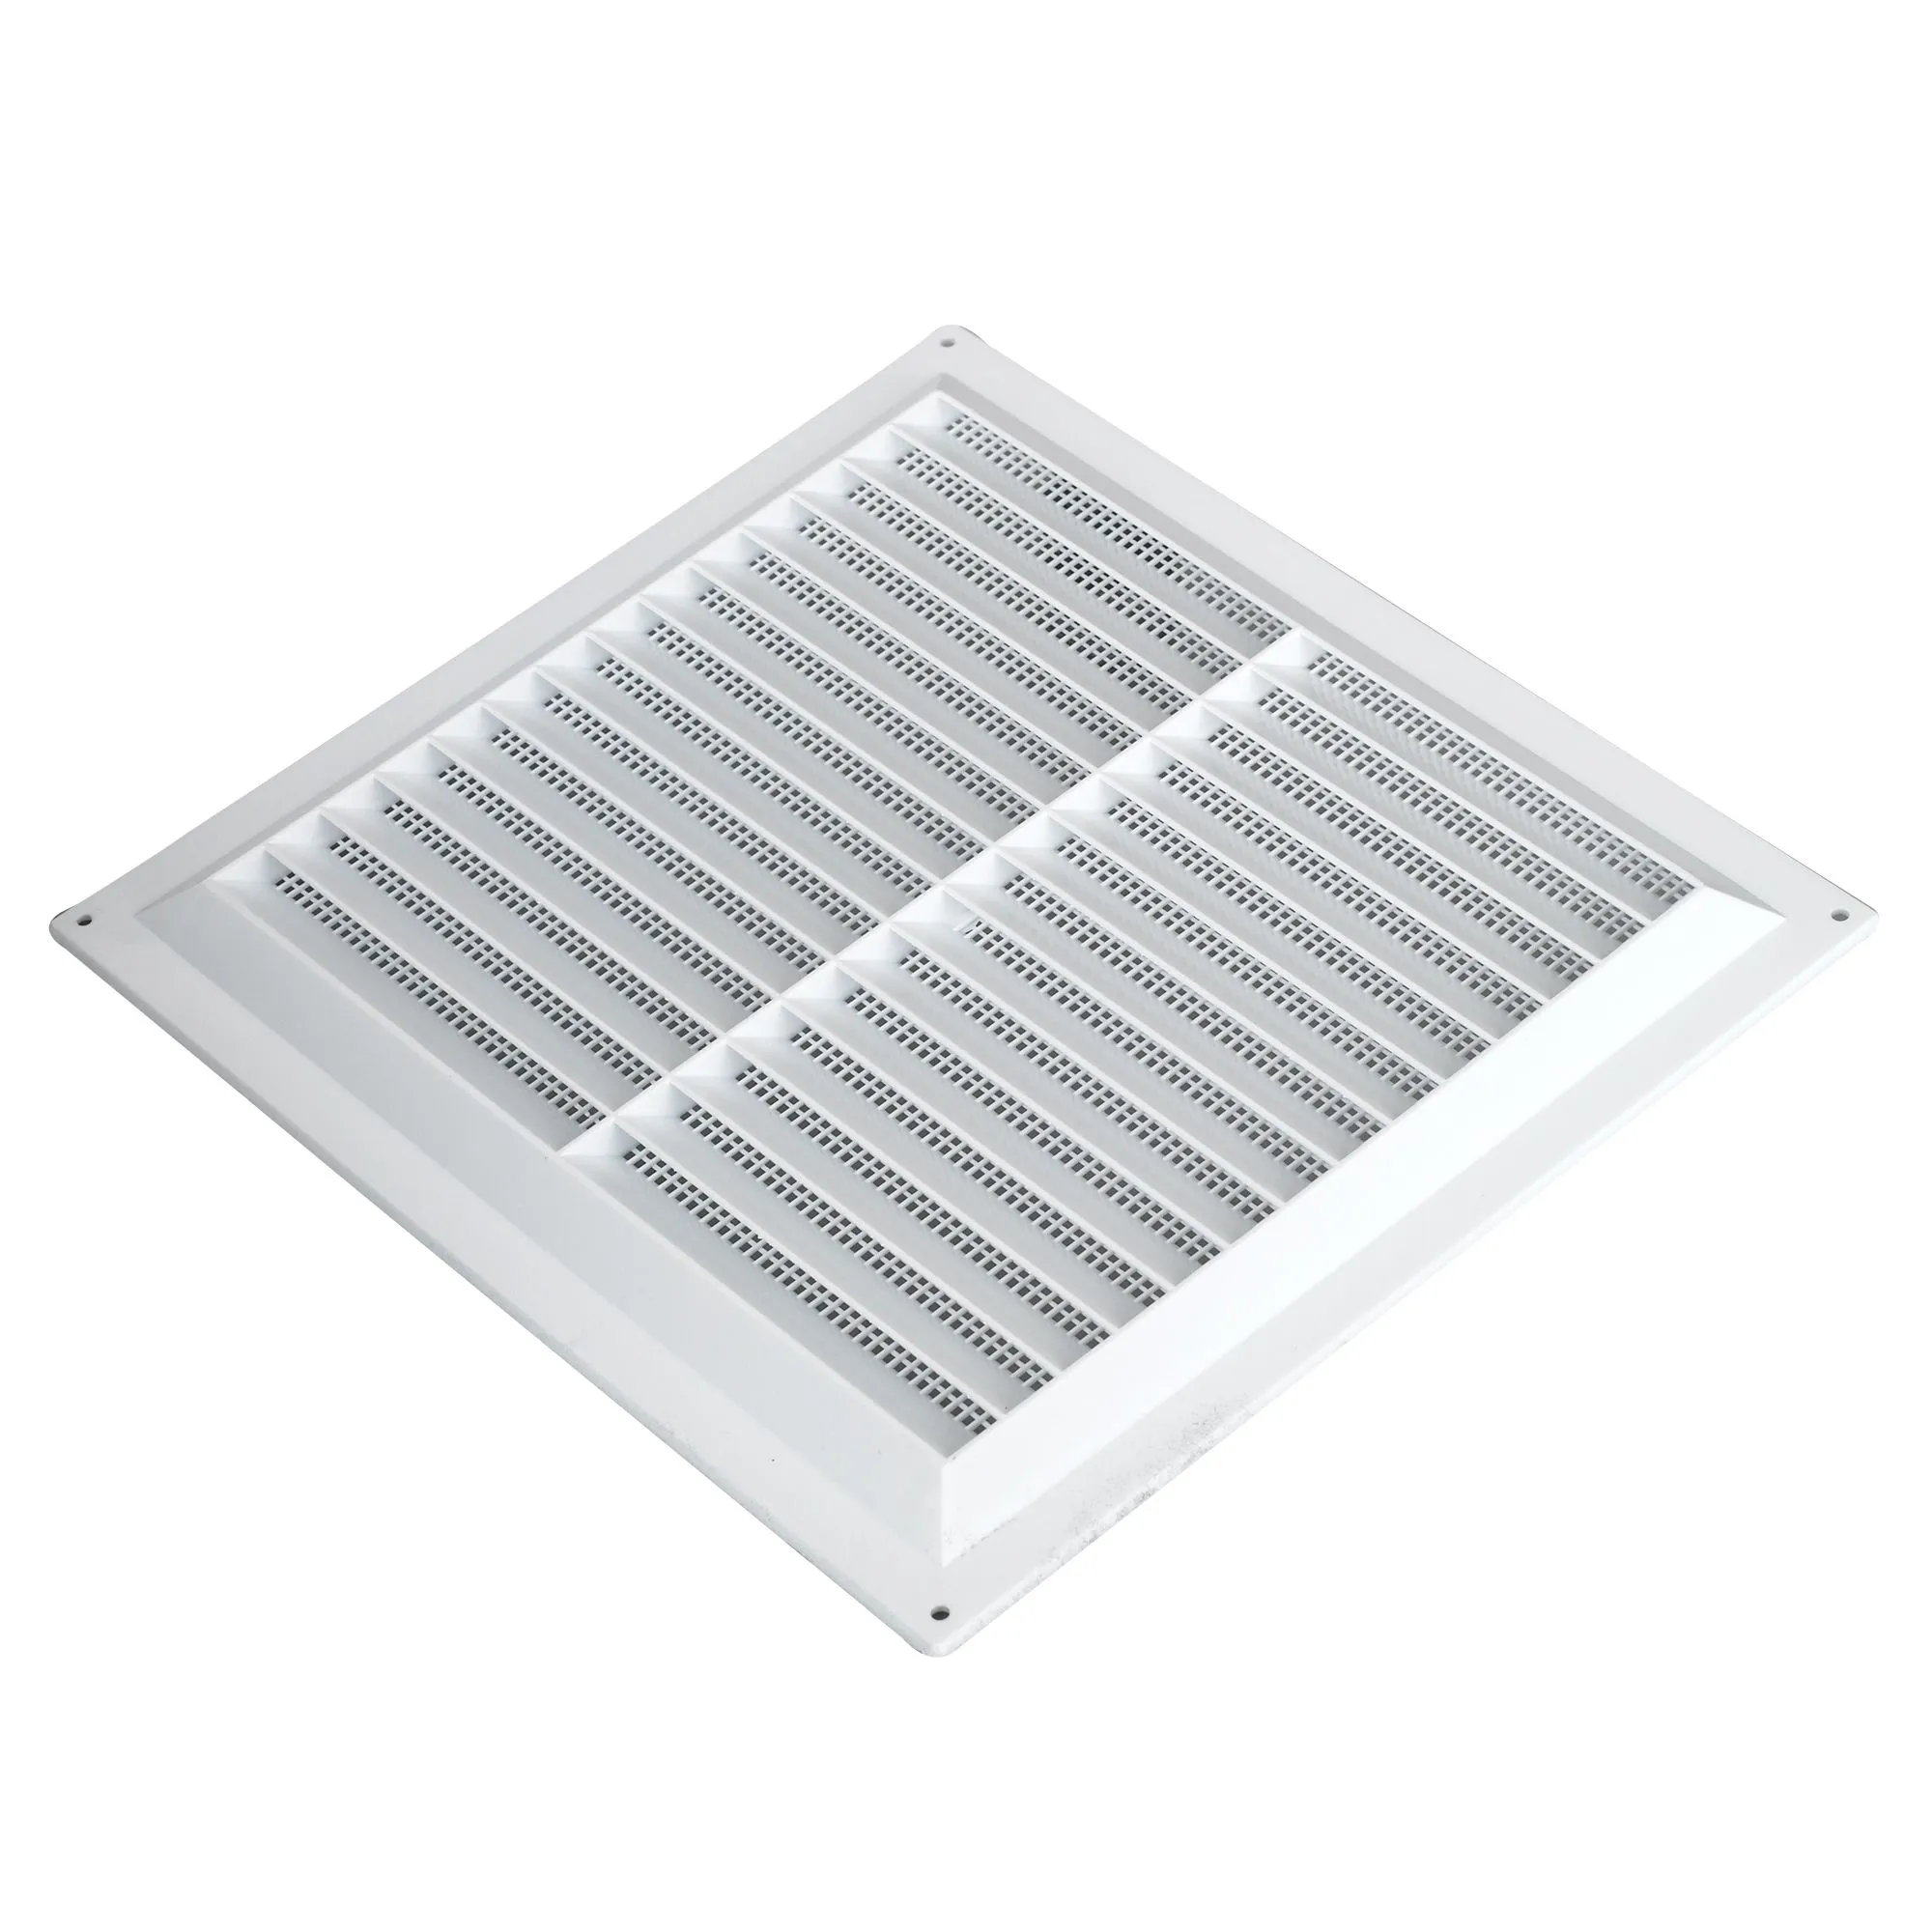 Manrose White Rectangular Applications requiring low extraction rates Fixed louvre vent & Fly screen, (H)152mm (W)229mm